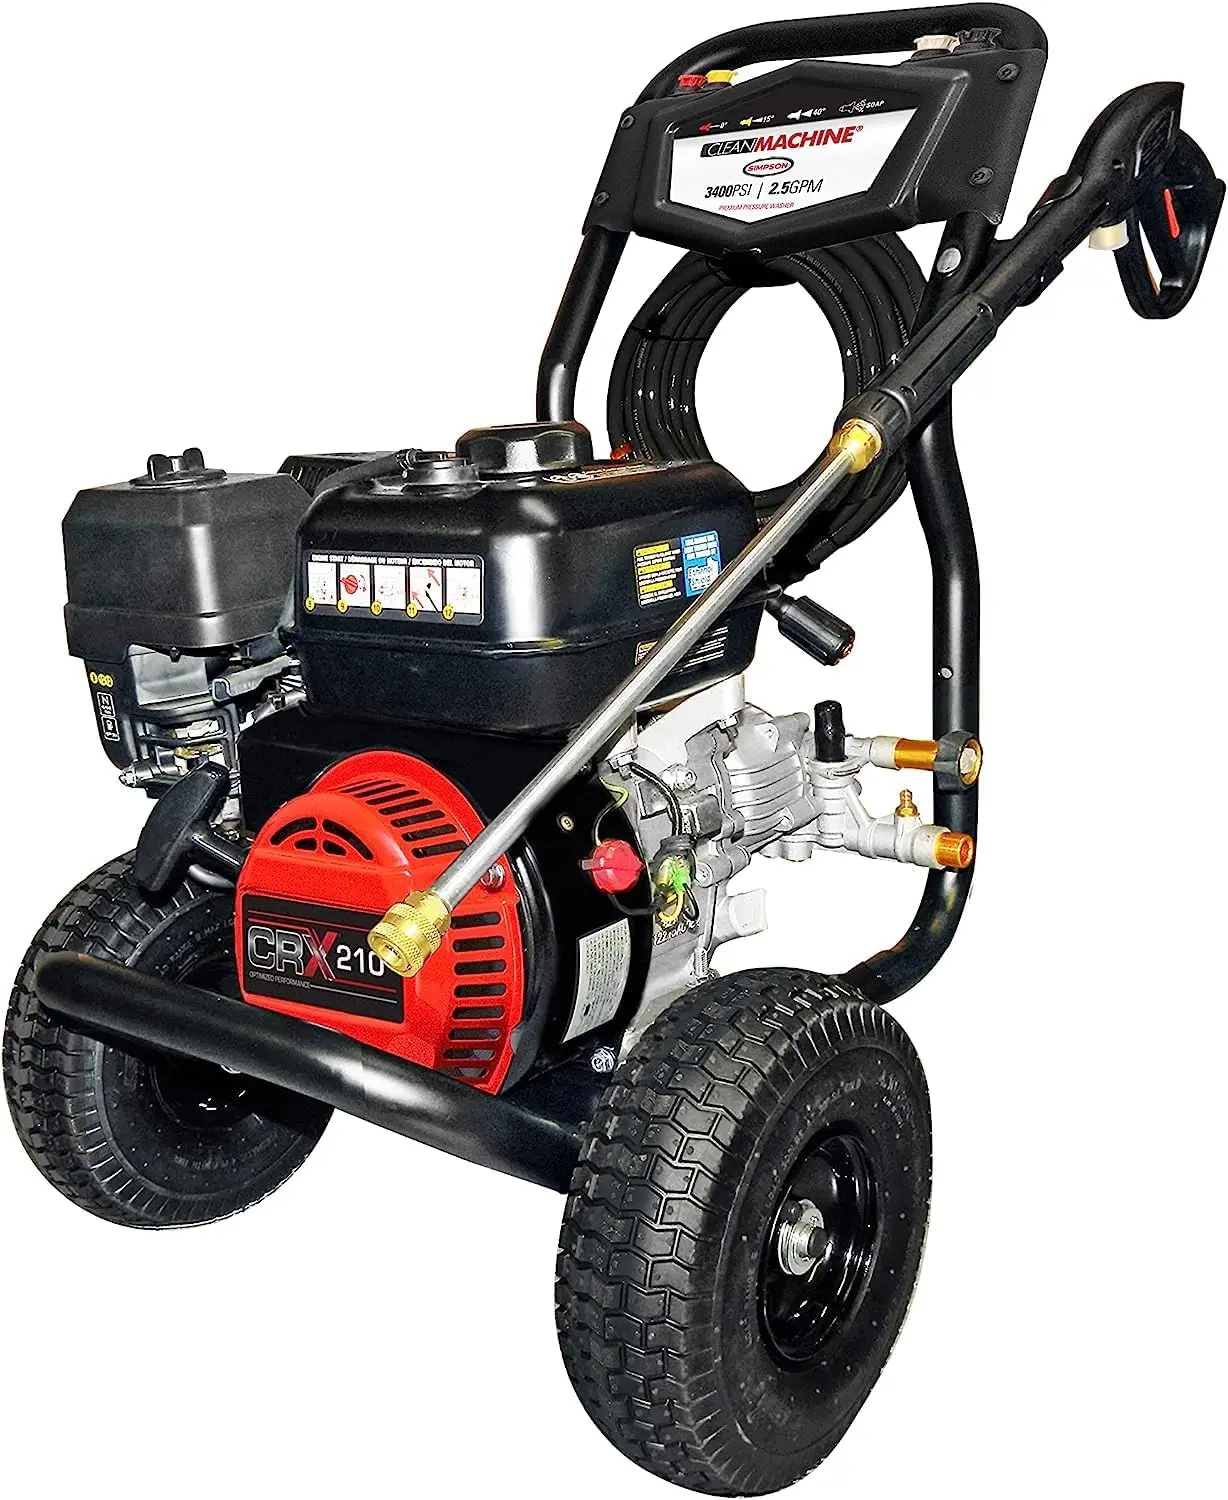 

Cleaning CM61083 Clean Machine 3400 PSI Gas Pressure Washer, 2.5 GPM, CRX Engine, Includes Spray Gun and Wand, 4 QC Nozzle Tips